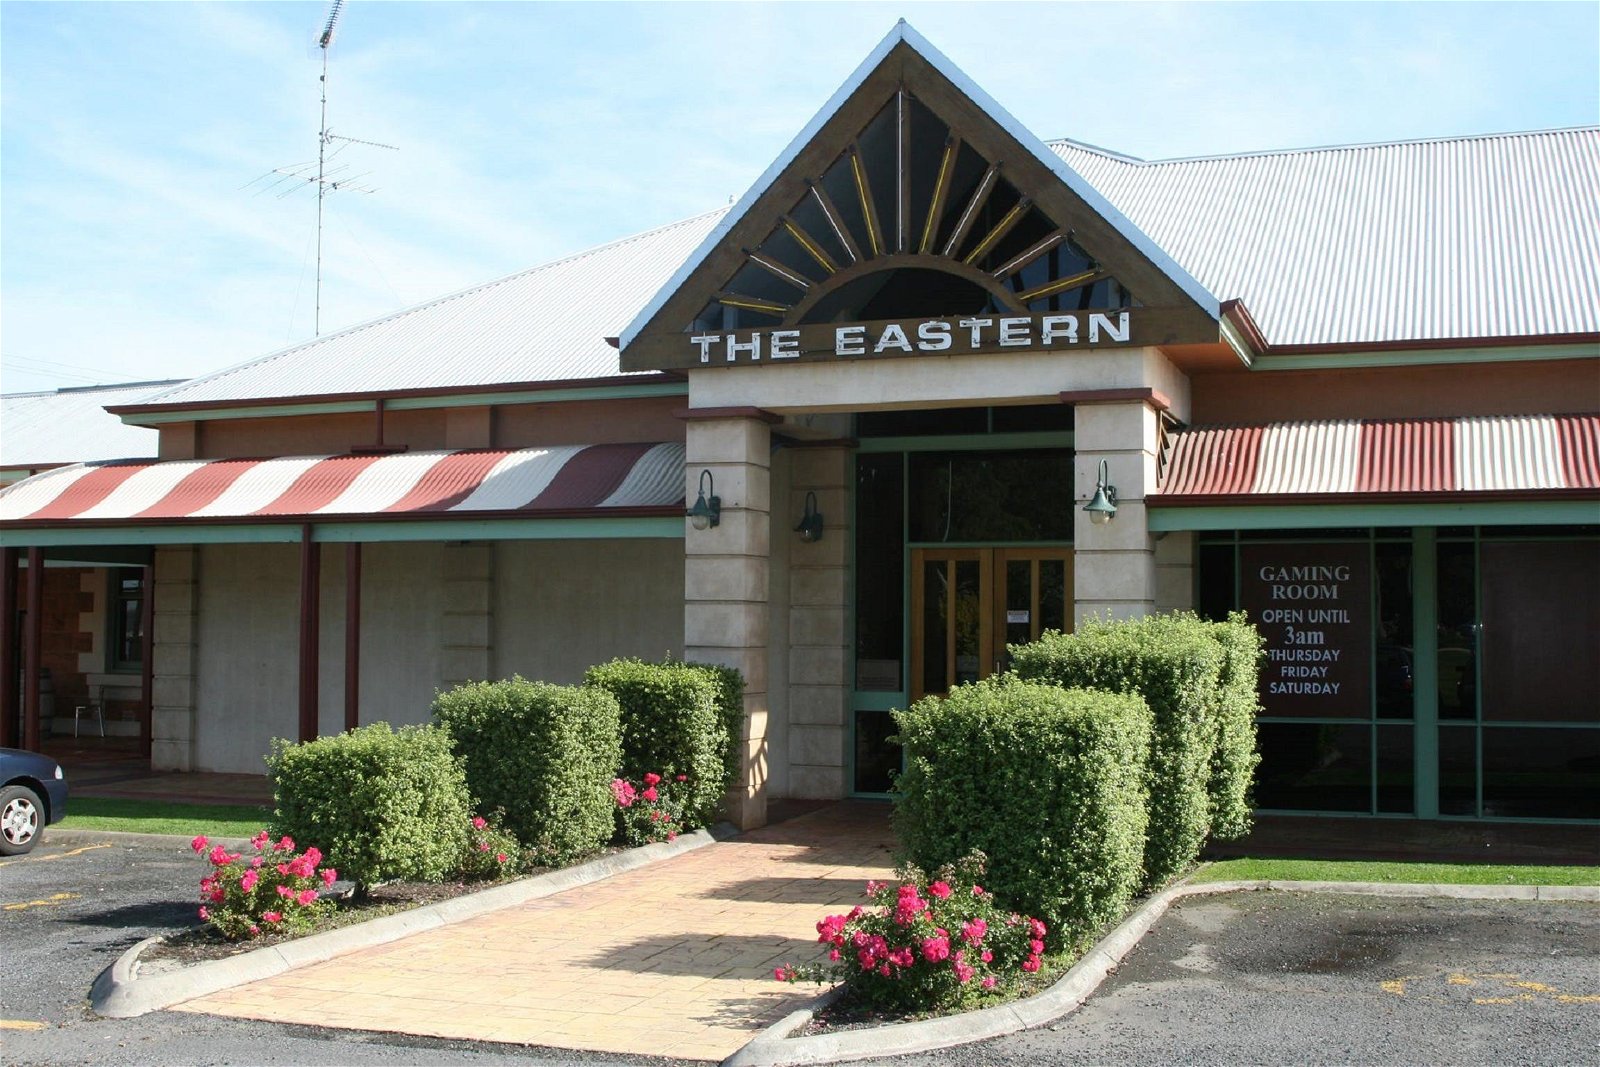 South Eastern Hotel - Food Delivery Shop